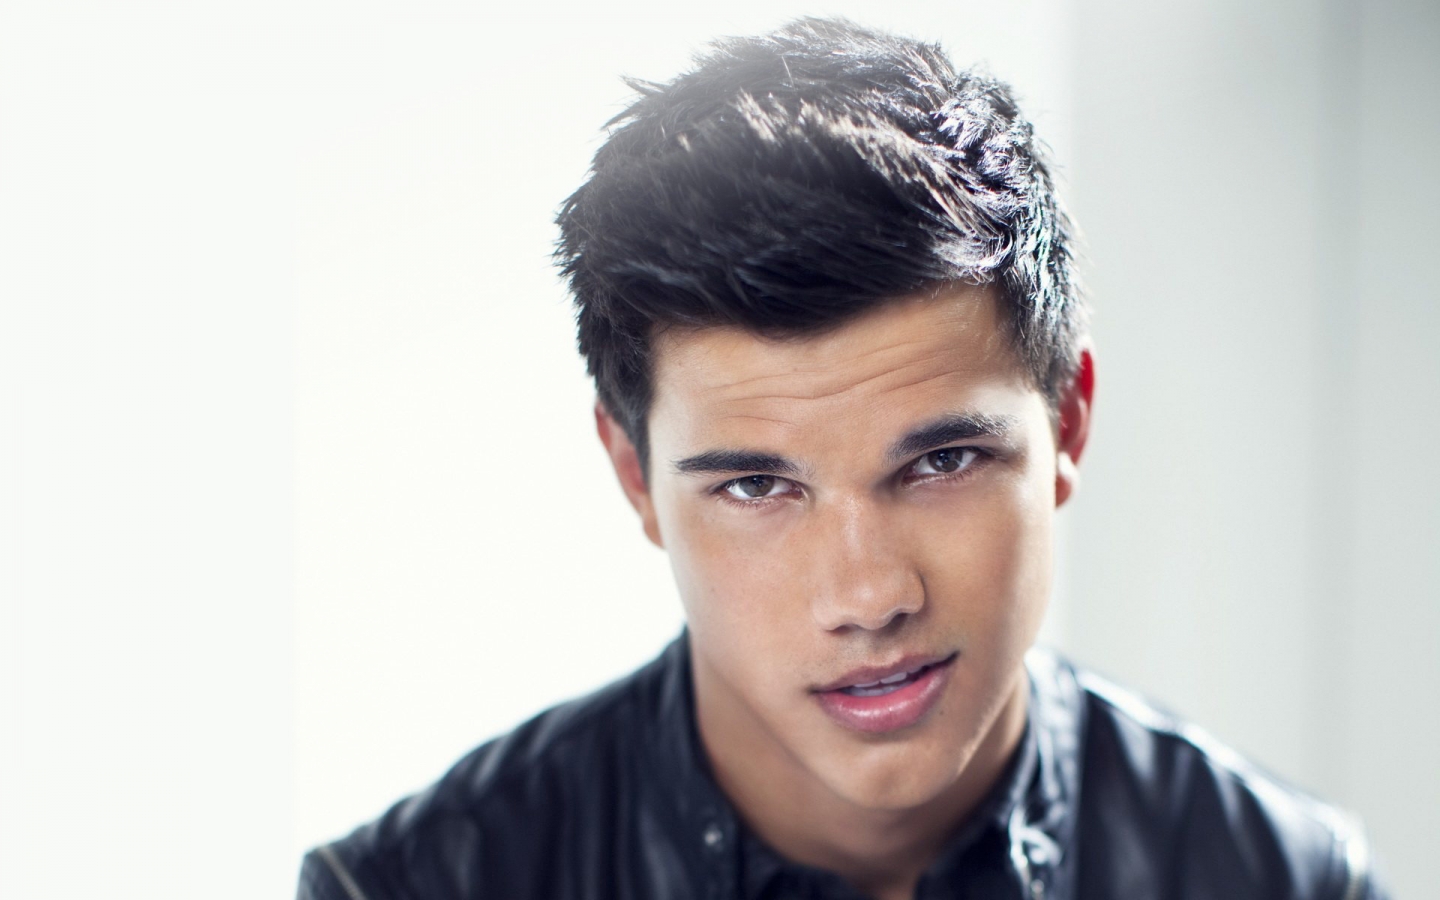 Taylor Lautner Look for 1440 x 900 widescreen resolution